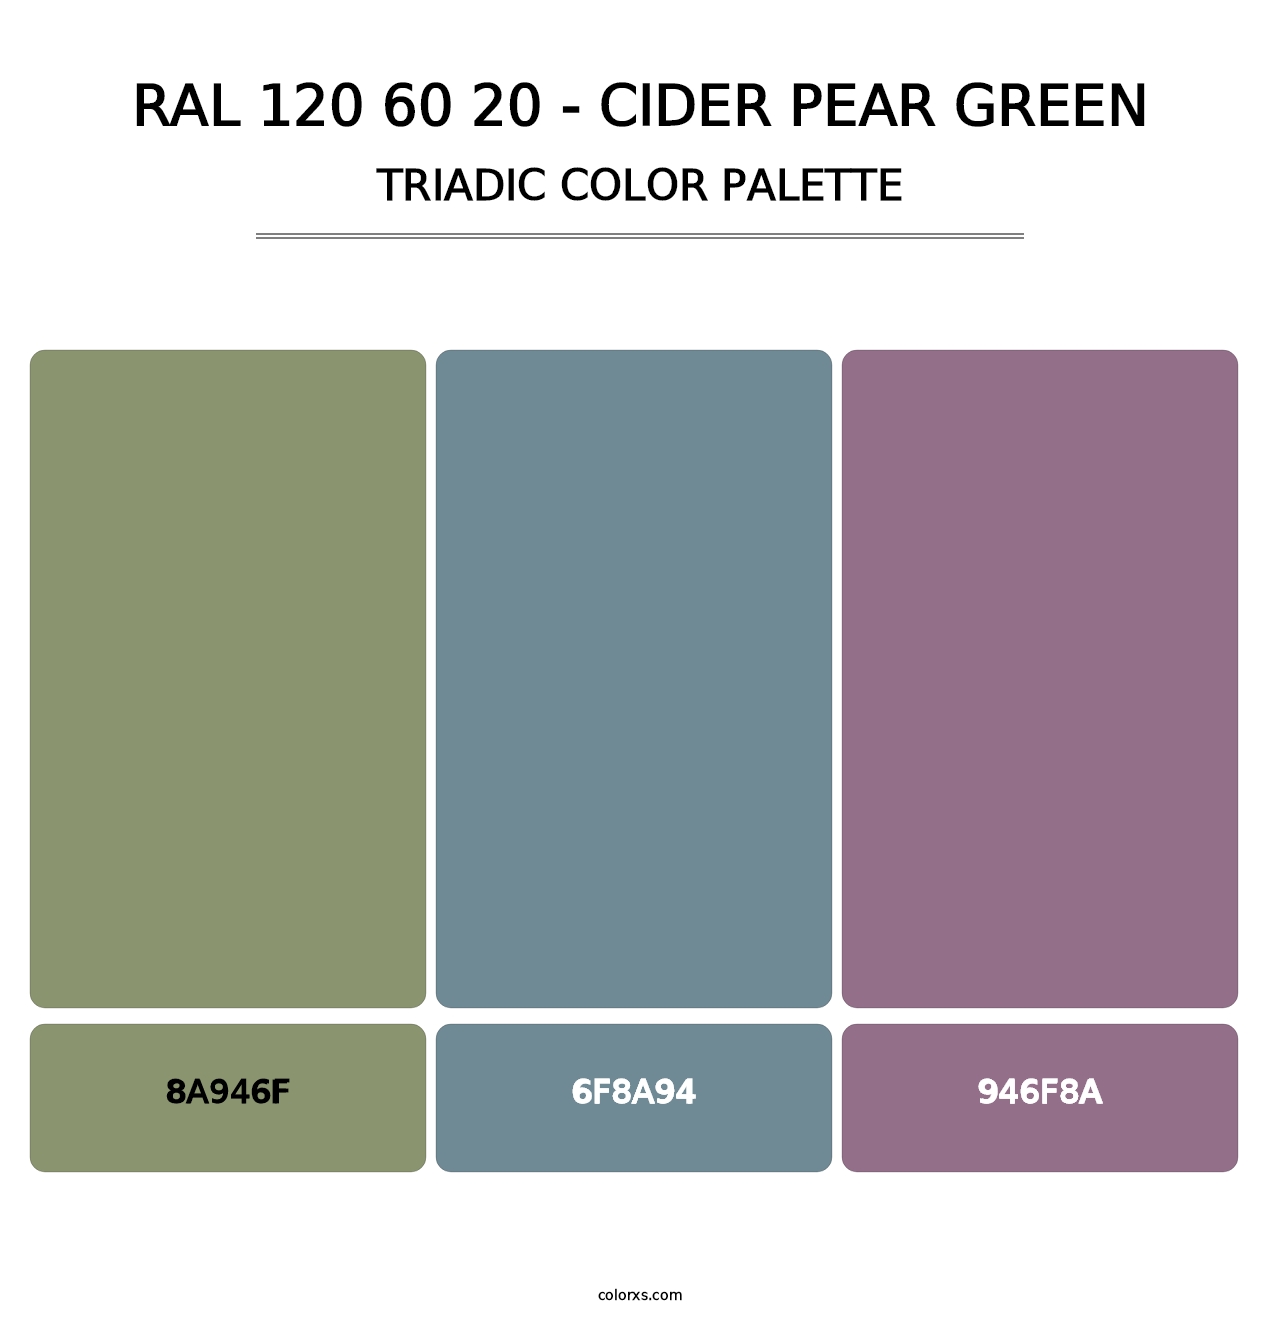 RAL 120 60 20 - Cider Pear Green - Triadic Color Palette